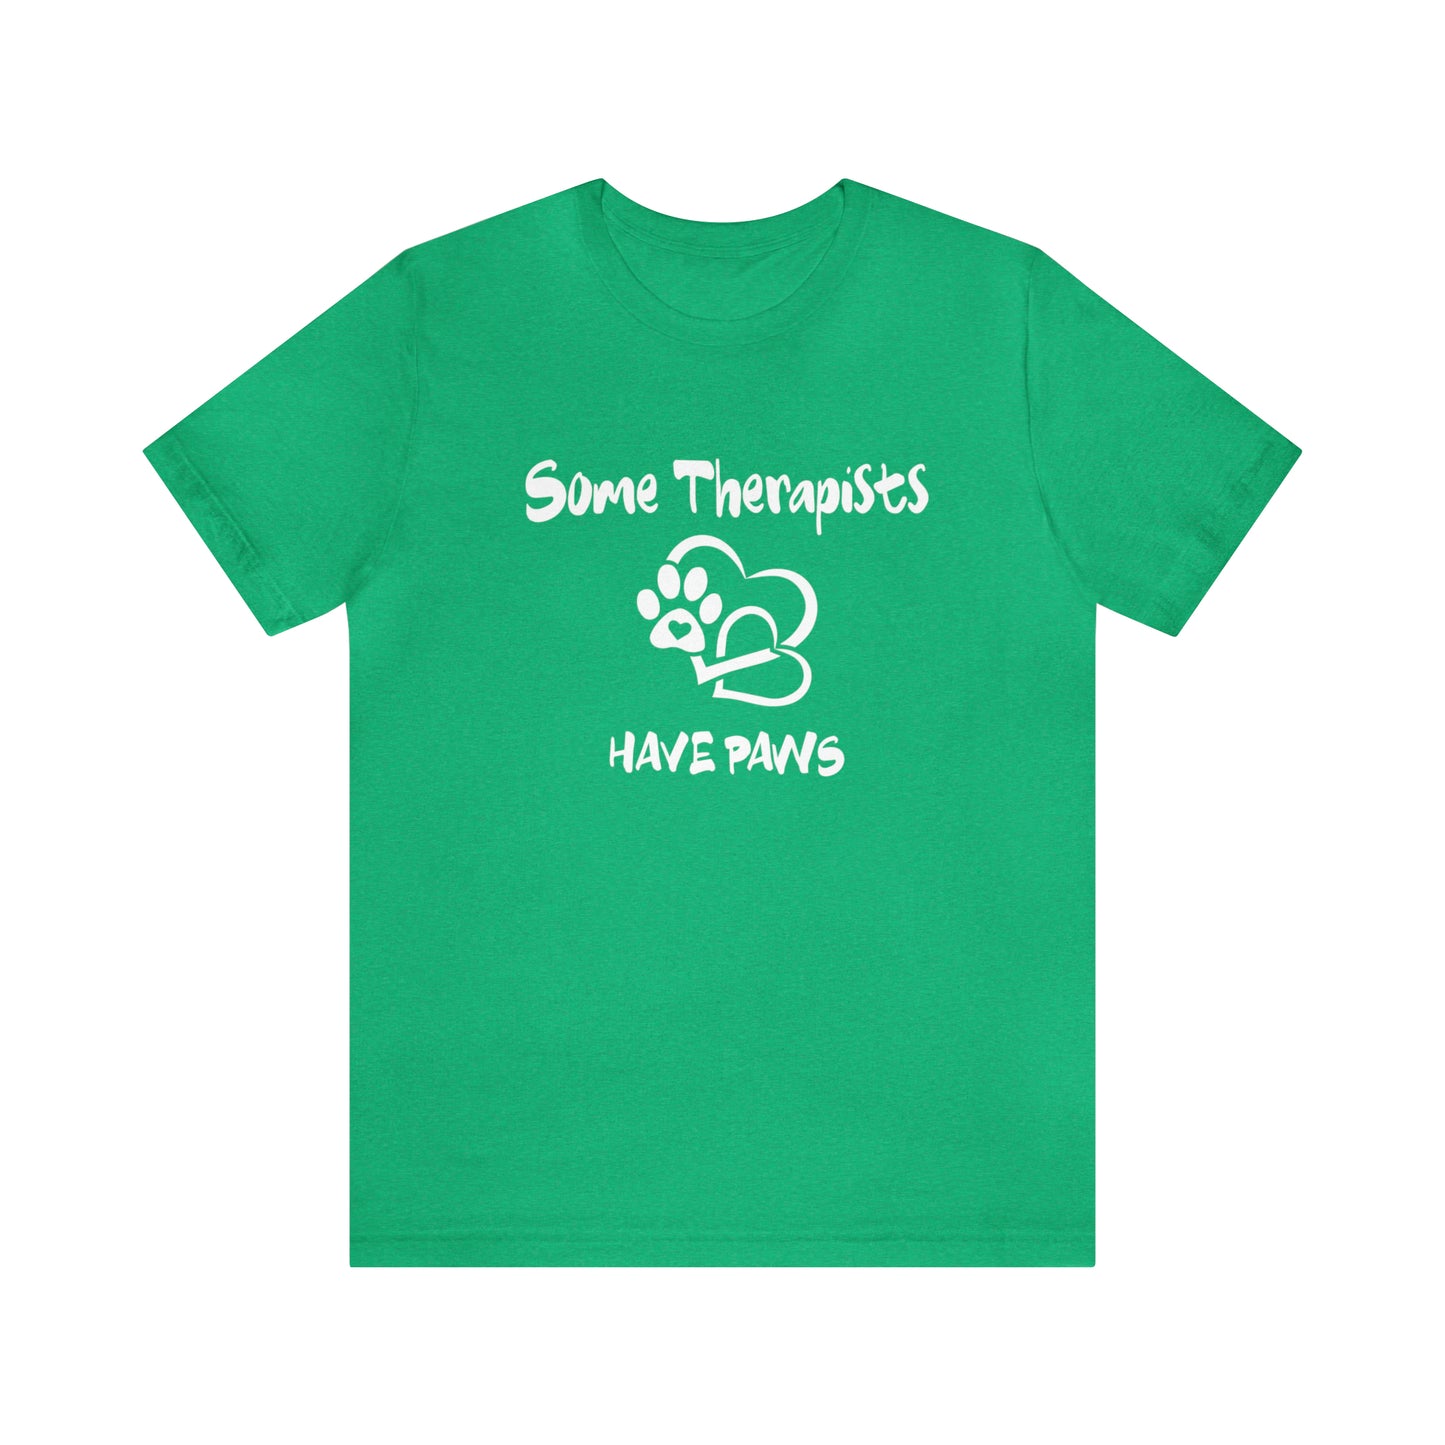 SOME THERAPISTS HAVE PAWS   -  Unisex Short Sleeve Tee